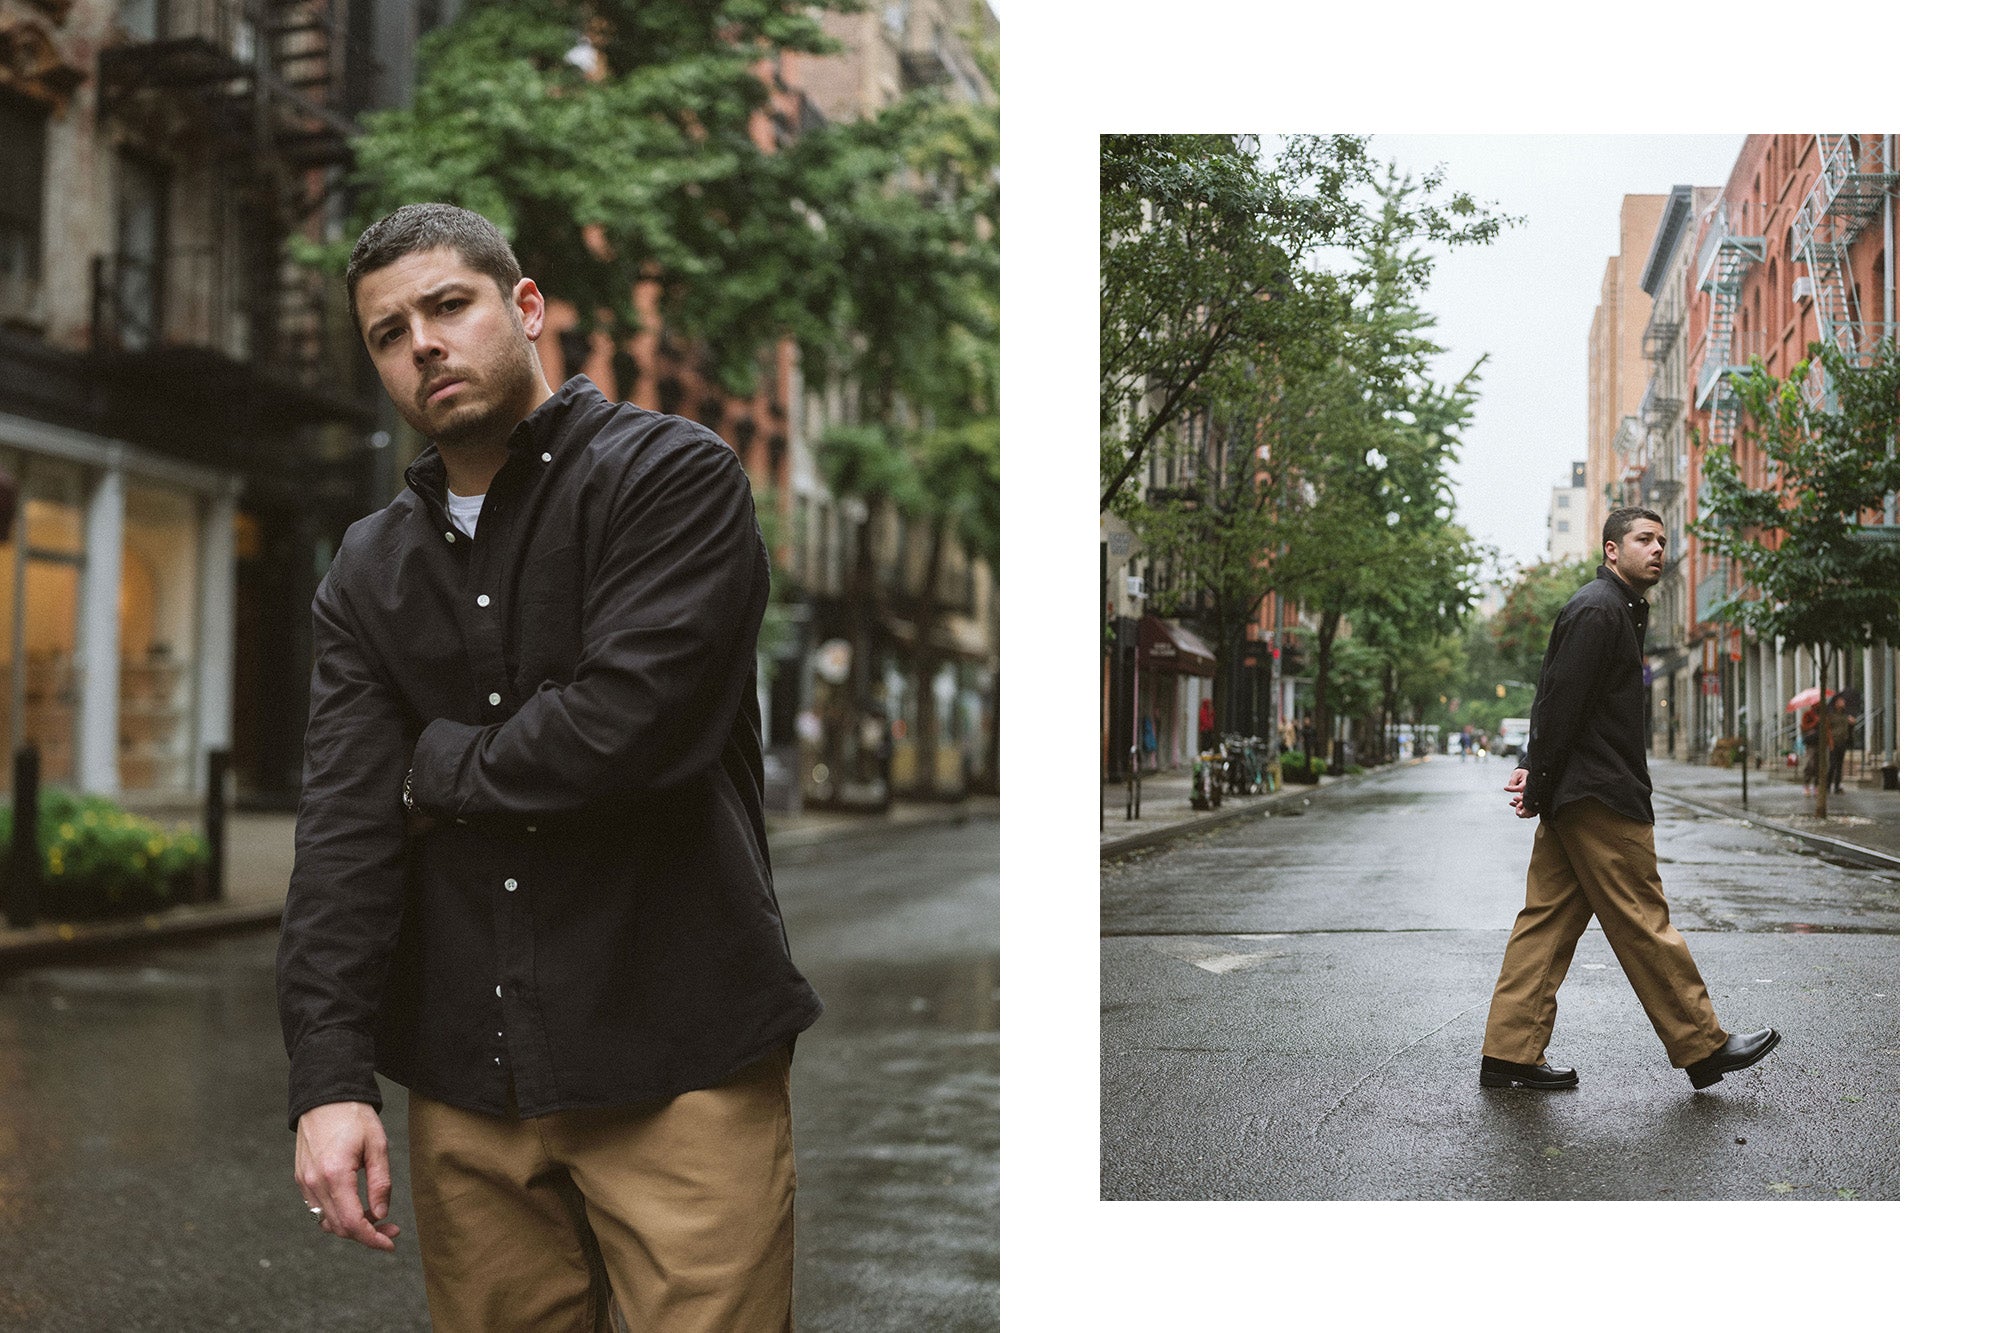 A diptych of a man in a black oxford shirt and tan pants standing on a rainy street.